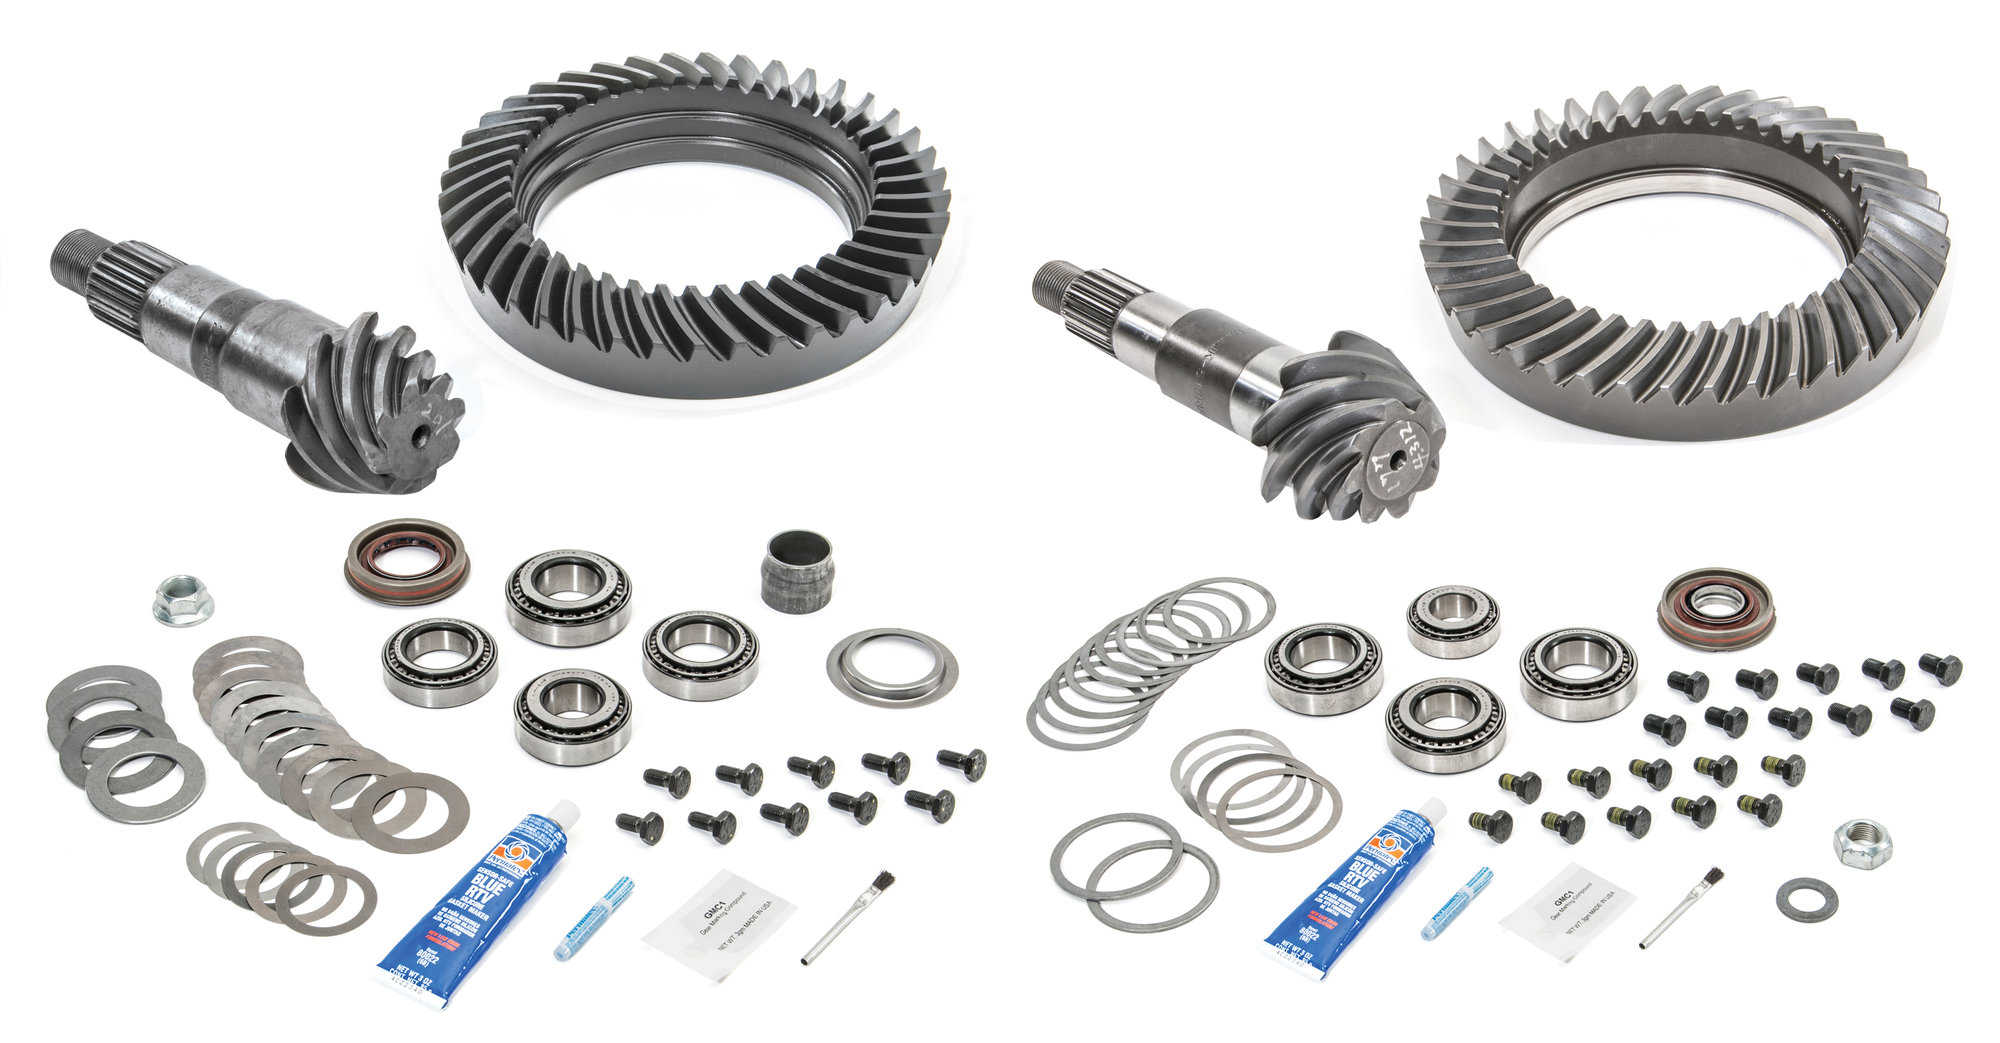 G2 Axle & Gear Front and Rear Ring and Pinion with Master Install Kits for  96-99 Jeep Cherokee XJ with Dana 30 Front & Chrysler 8.25 Rear